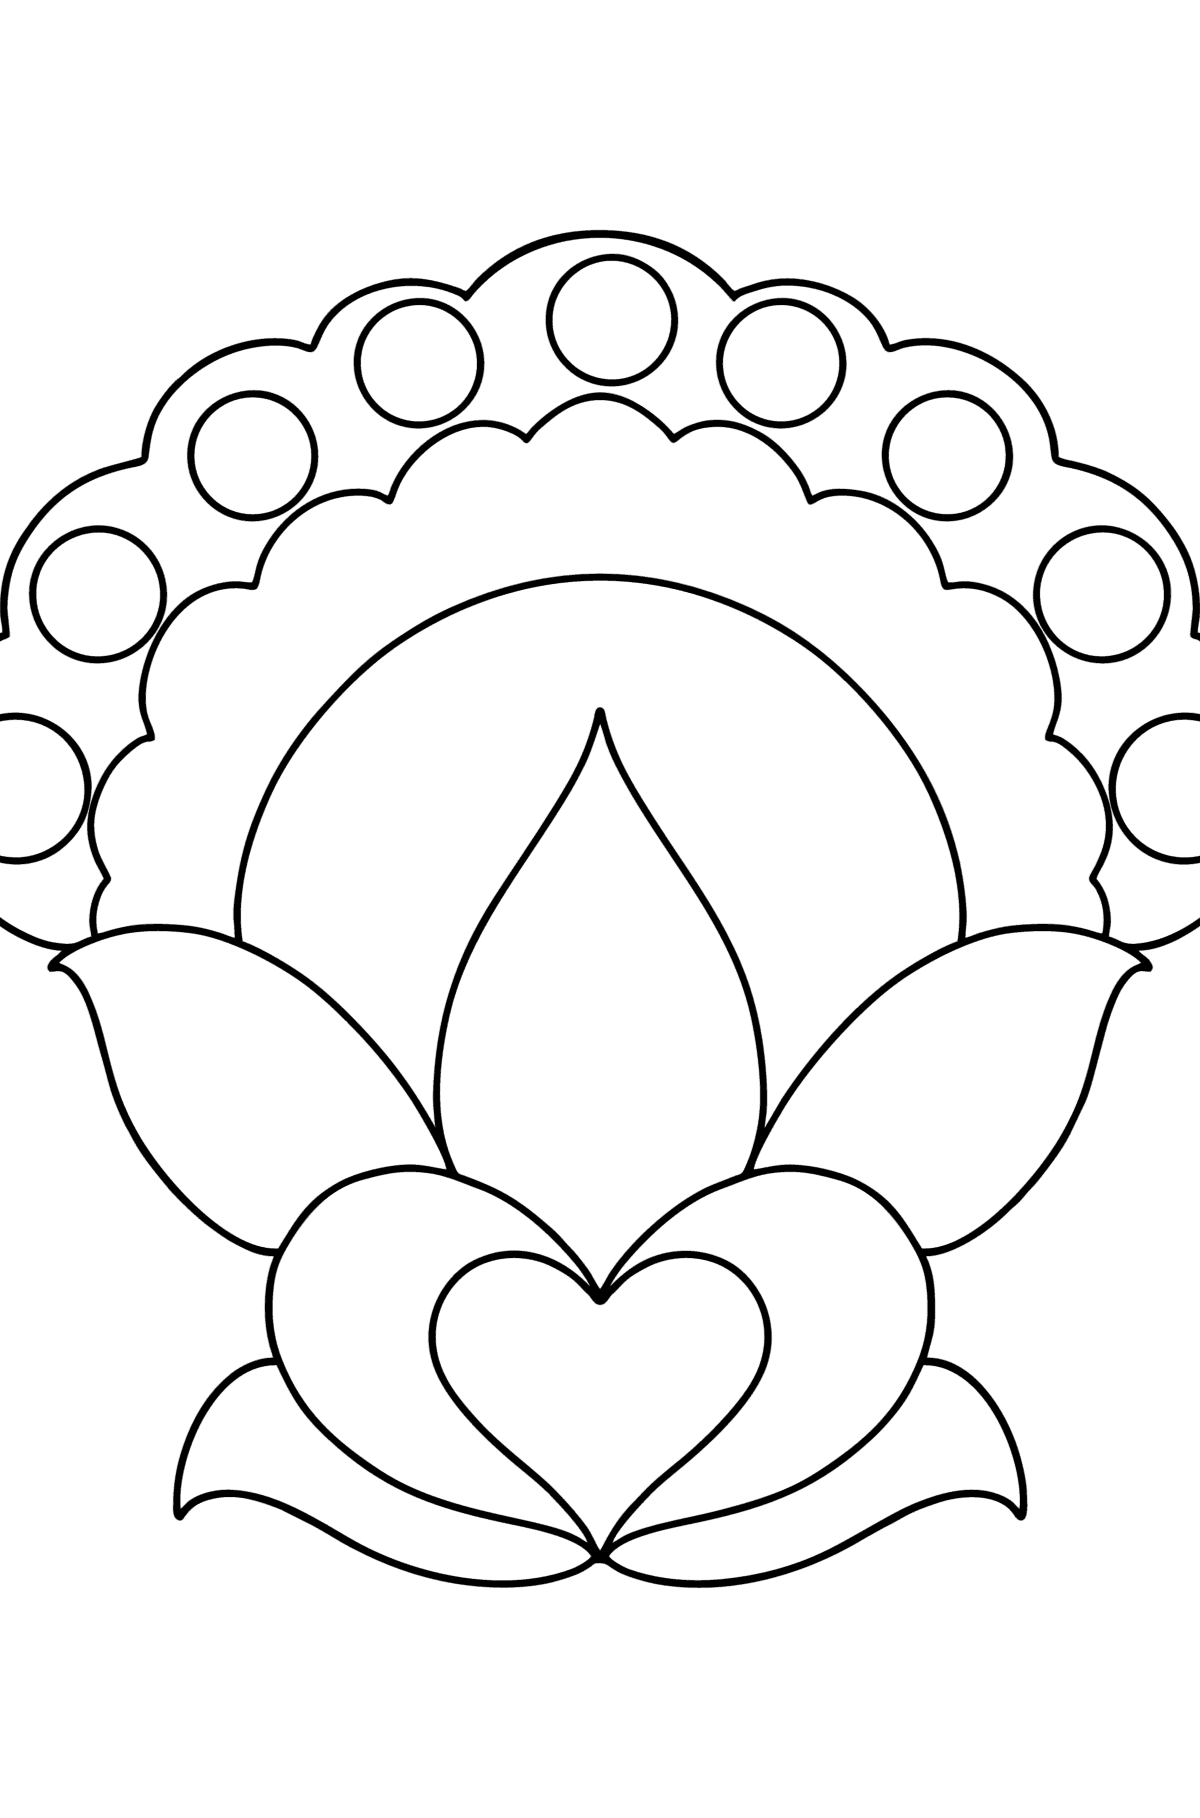 Simple coloring page - Flower Anti stress - Coloring Pages for Kids